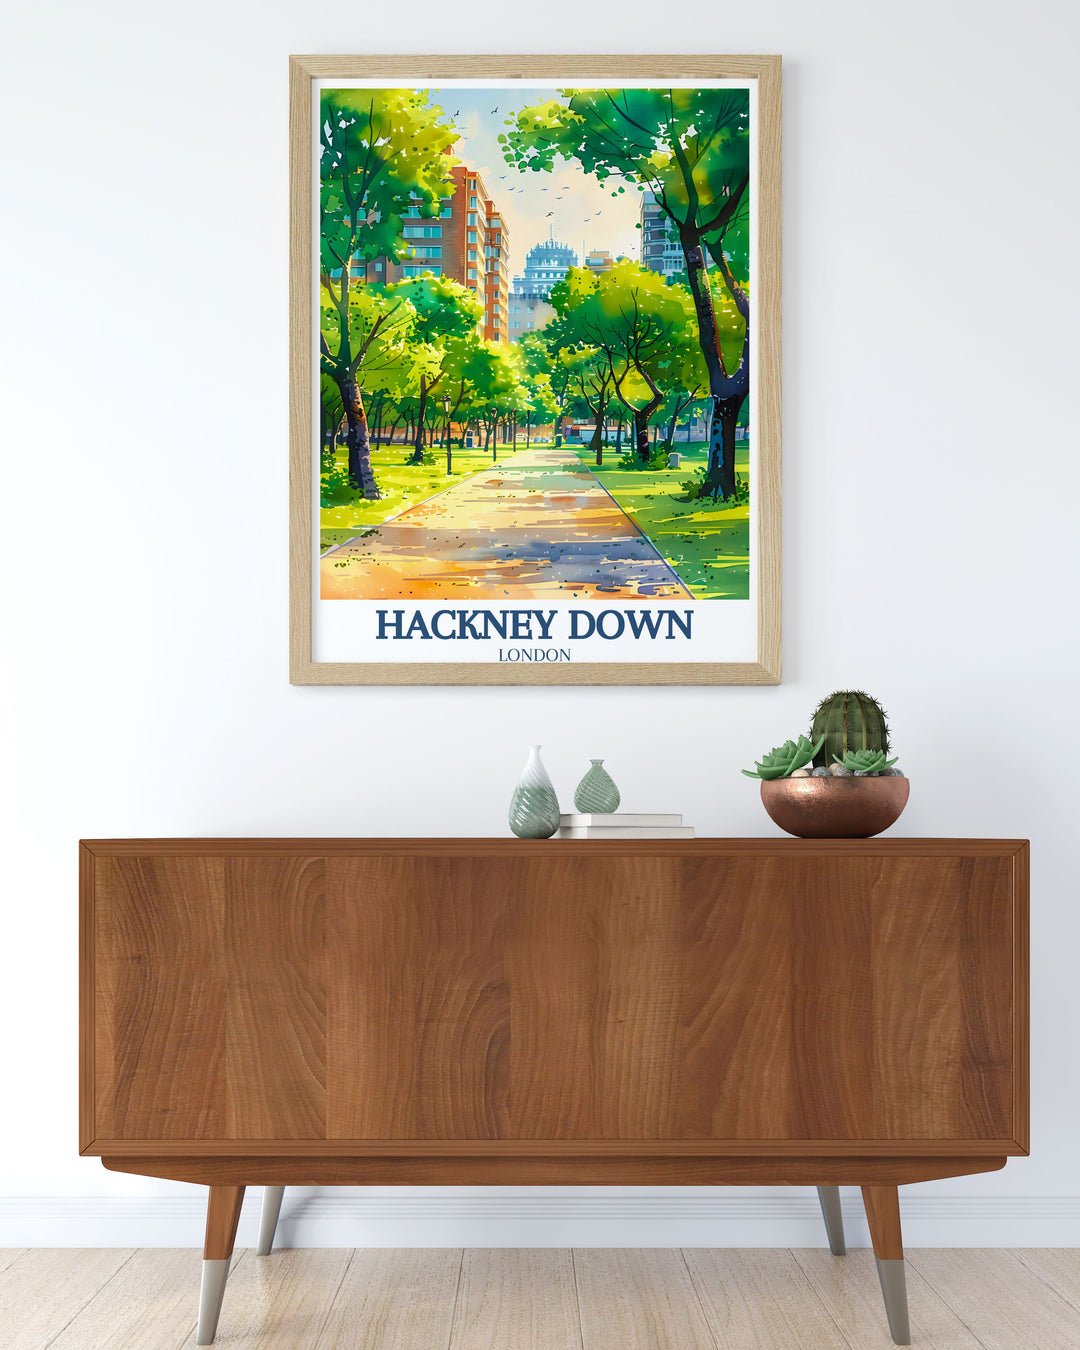 This detailed illustration of Hackney Downs Park features expansive lawns and mature trees, offering a picturesque view of one of East Londons favorite green spaces, perfect for enhancing your home decor.